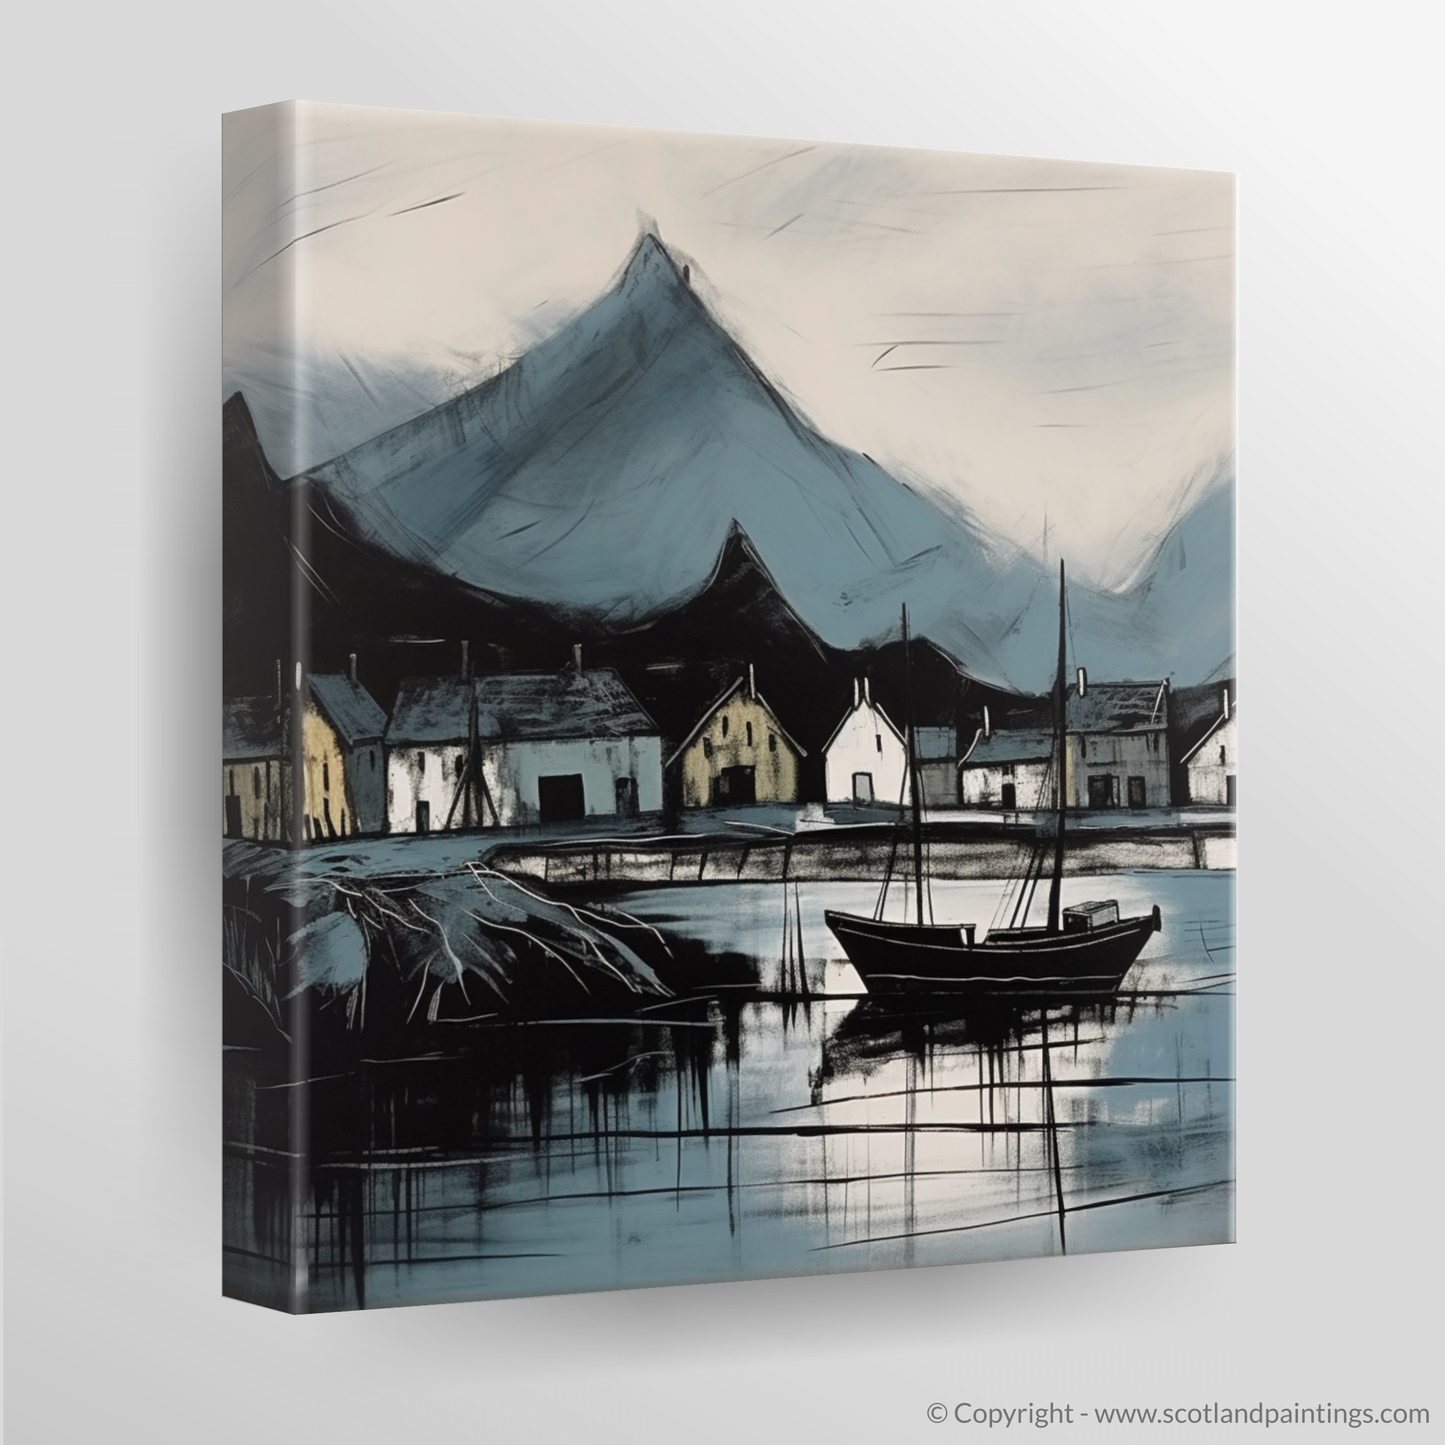 Painting and Art Print of Fort William, Highlands. Fort William: Harbour of the Highlands.